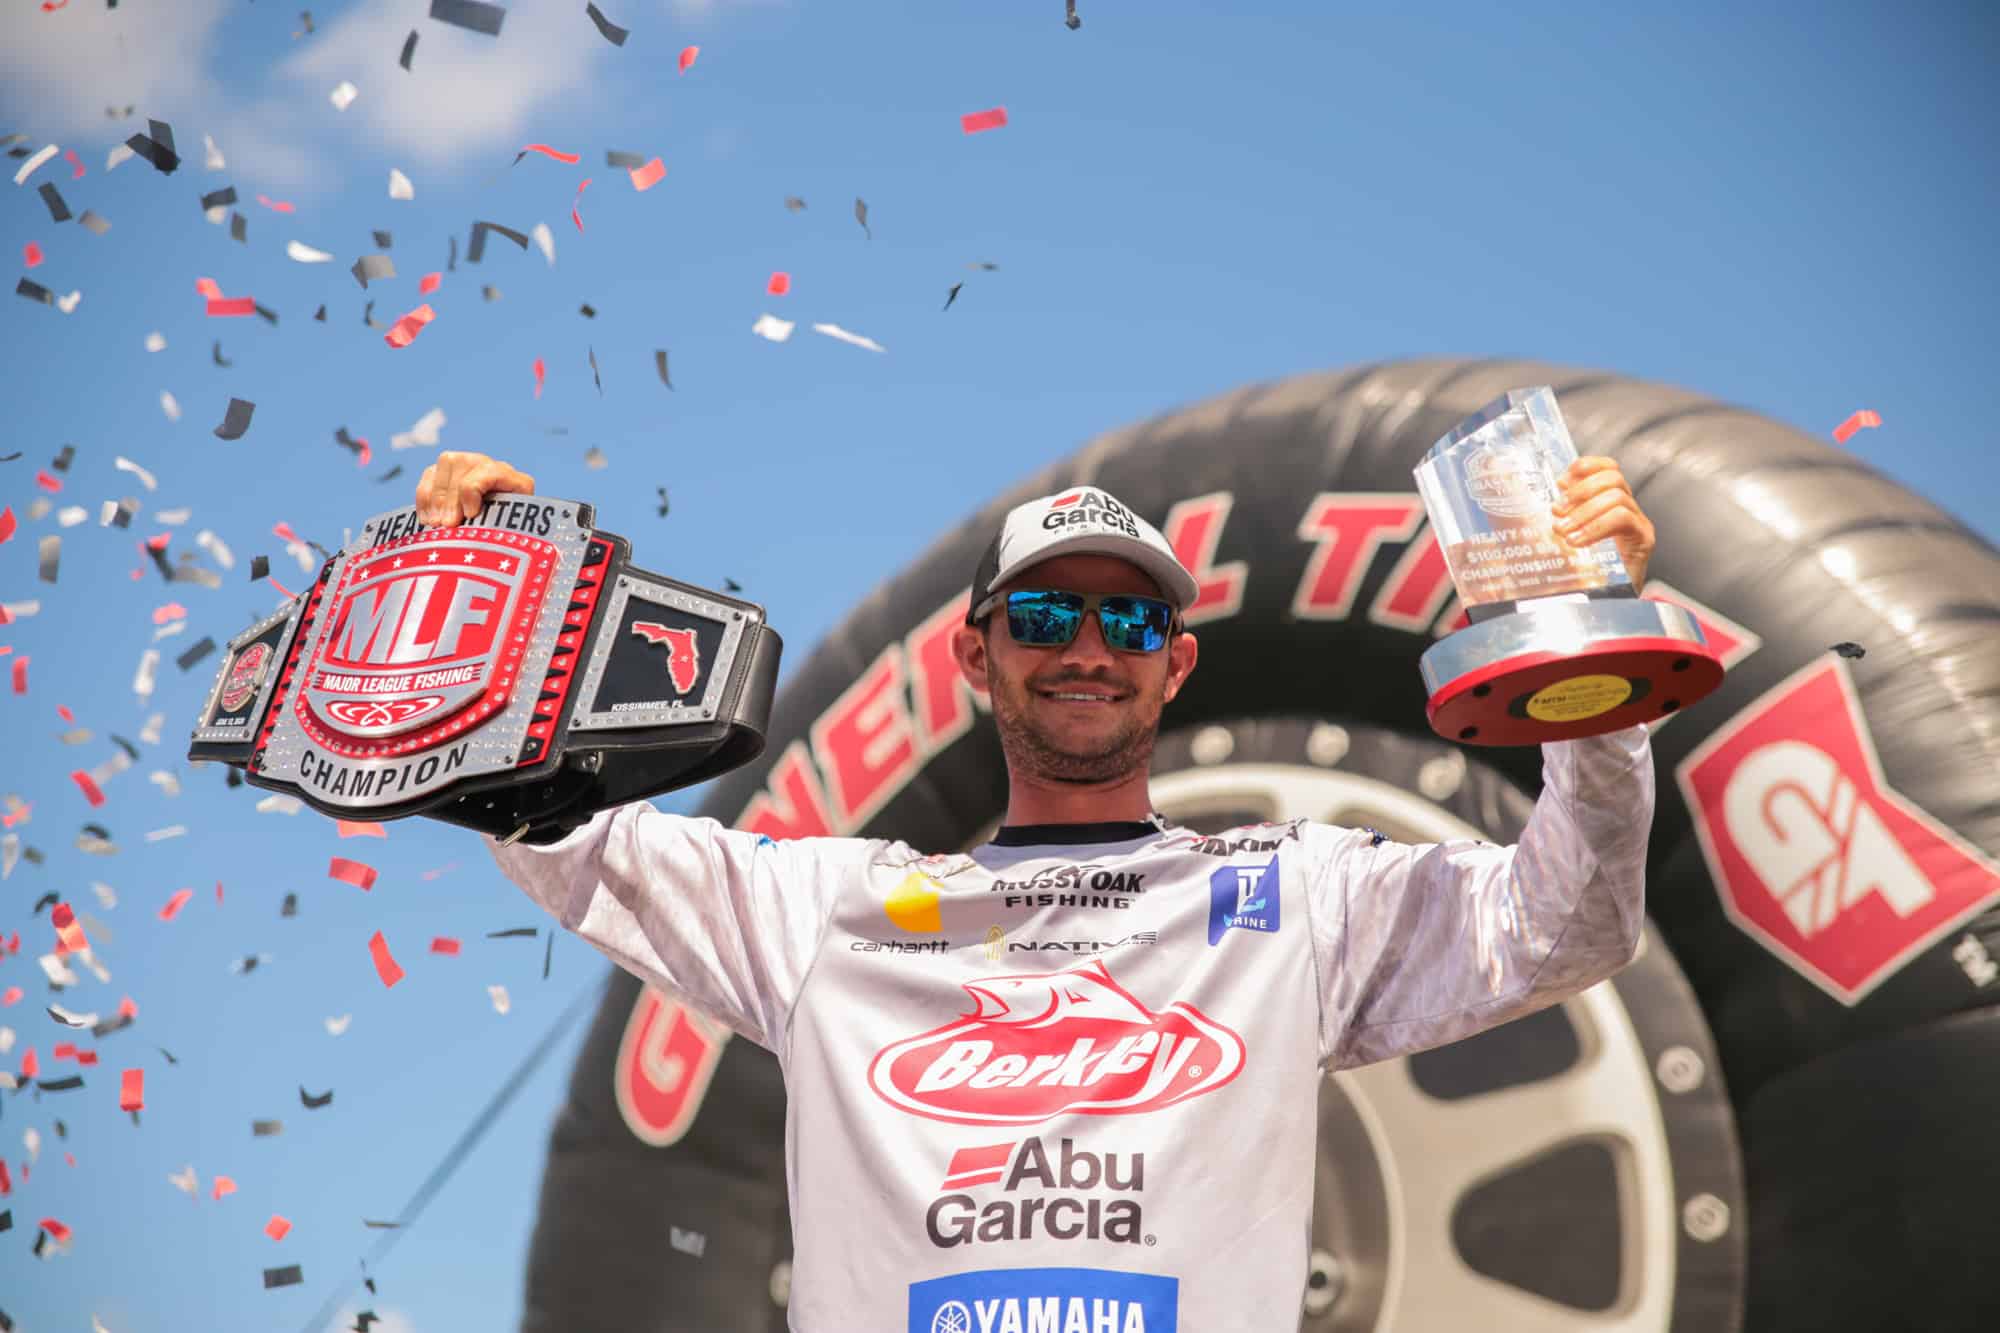 “Major League Fishing” Ends 2020 on High Note with Viewership Growth | BassFIRST